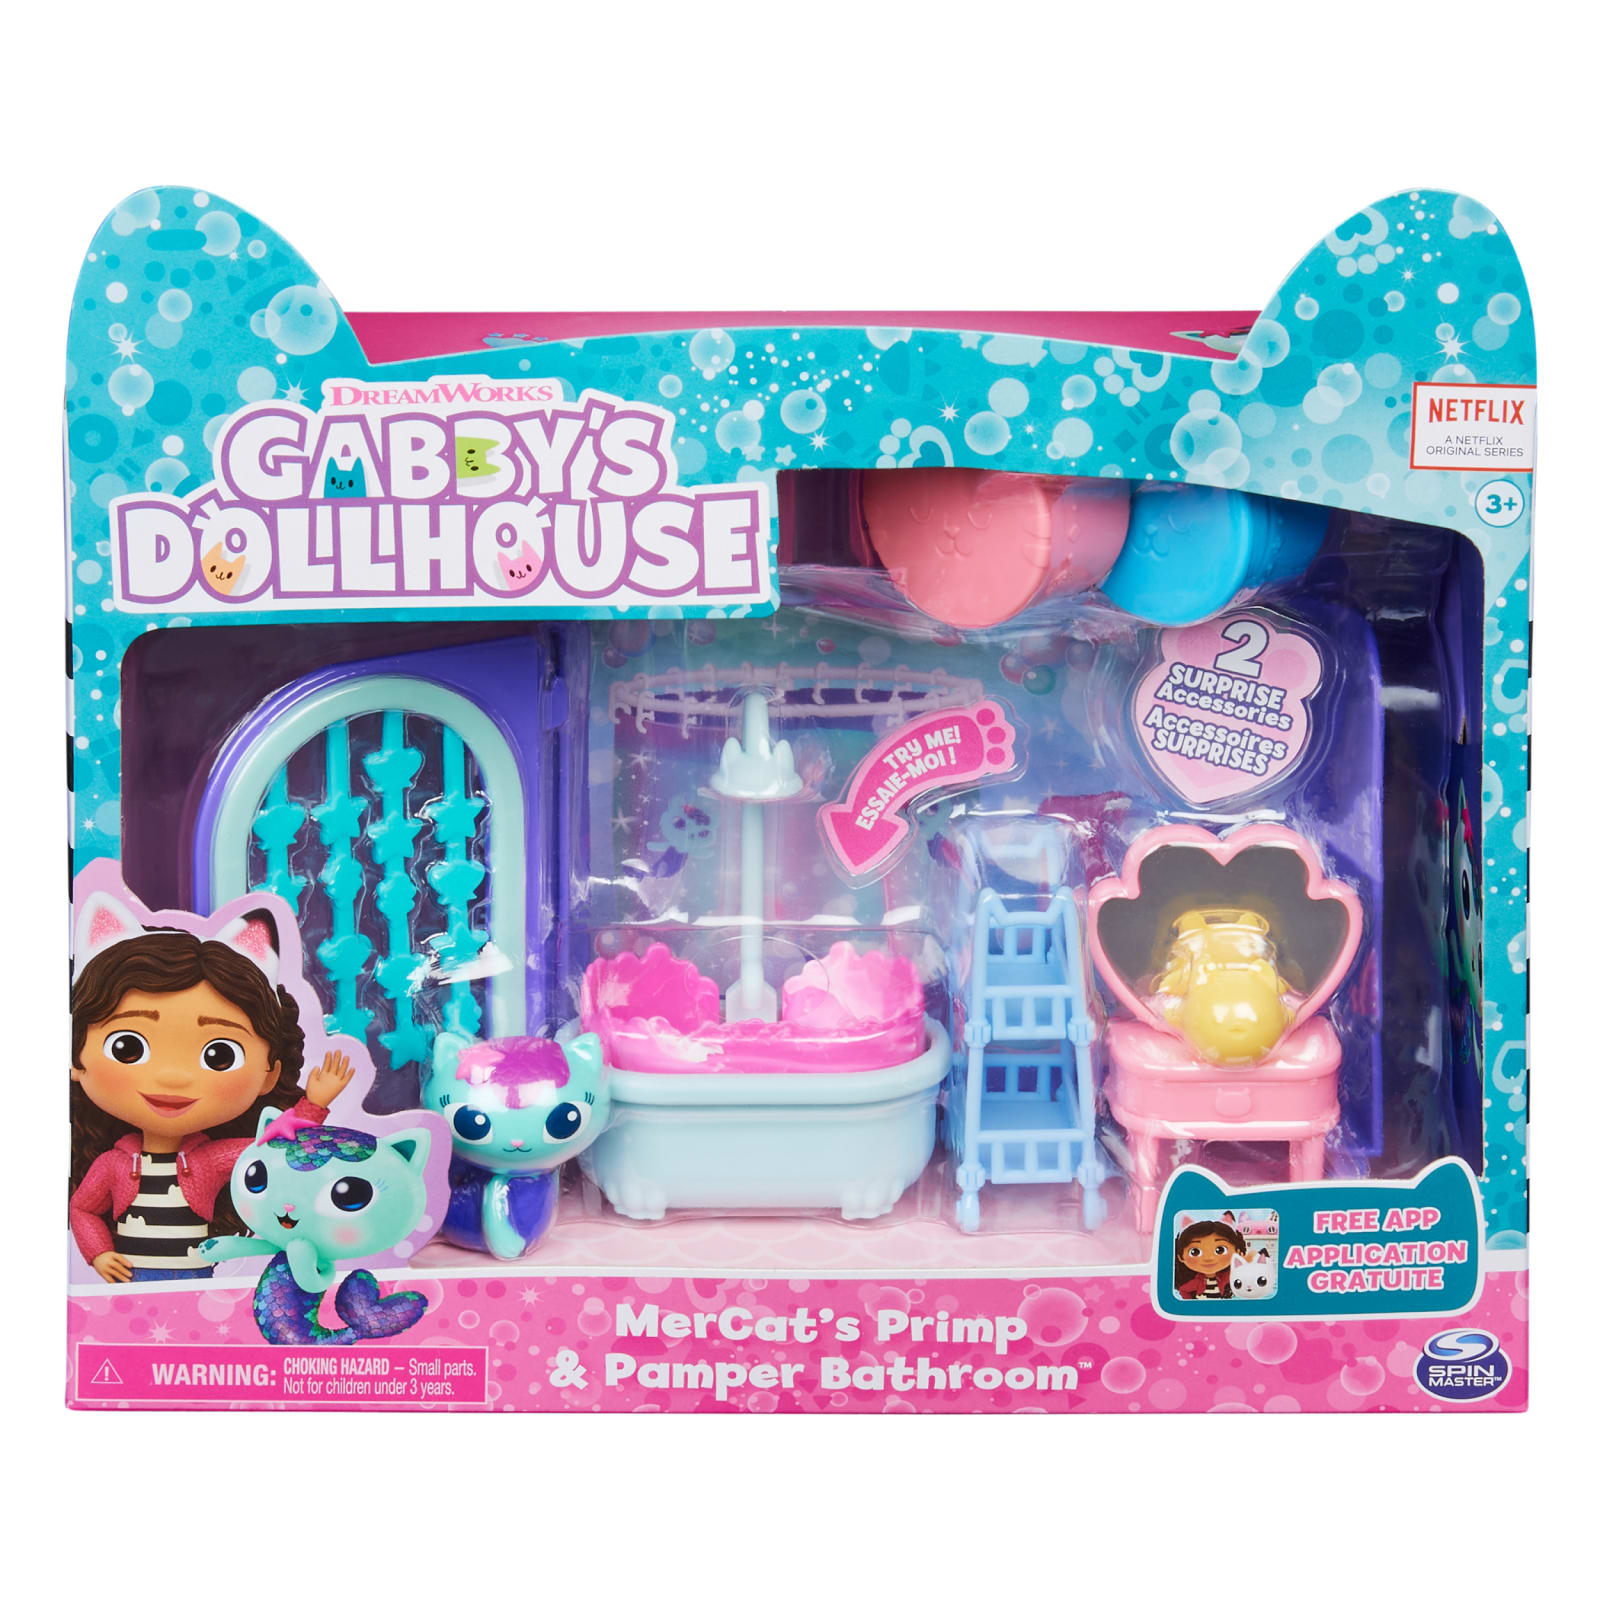  Gabby's Dollhouse, Gabby Deluxe Craft Dolls and